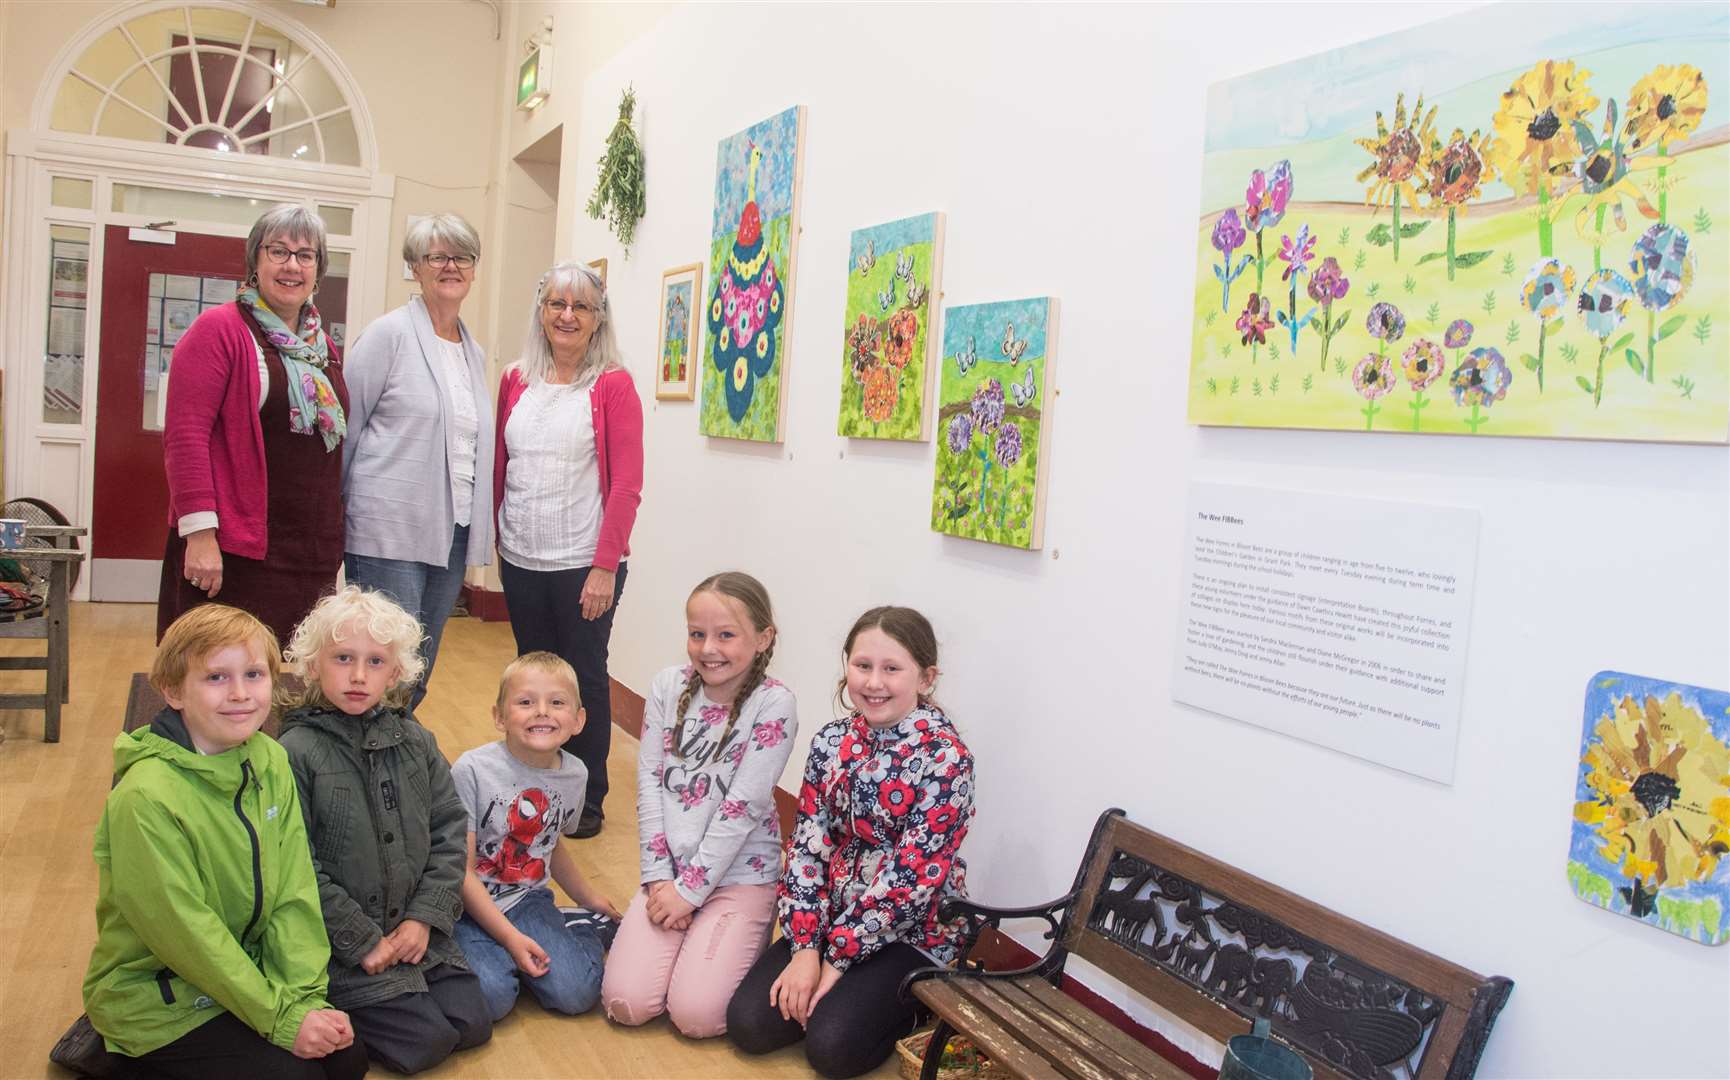 (Back from left) Dawn Cawthra-Smith (artist who helped the Wee FIBees) with Judi O-May and Jenny Allan along with old and new members of the group.